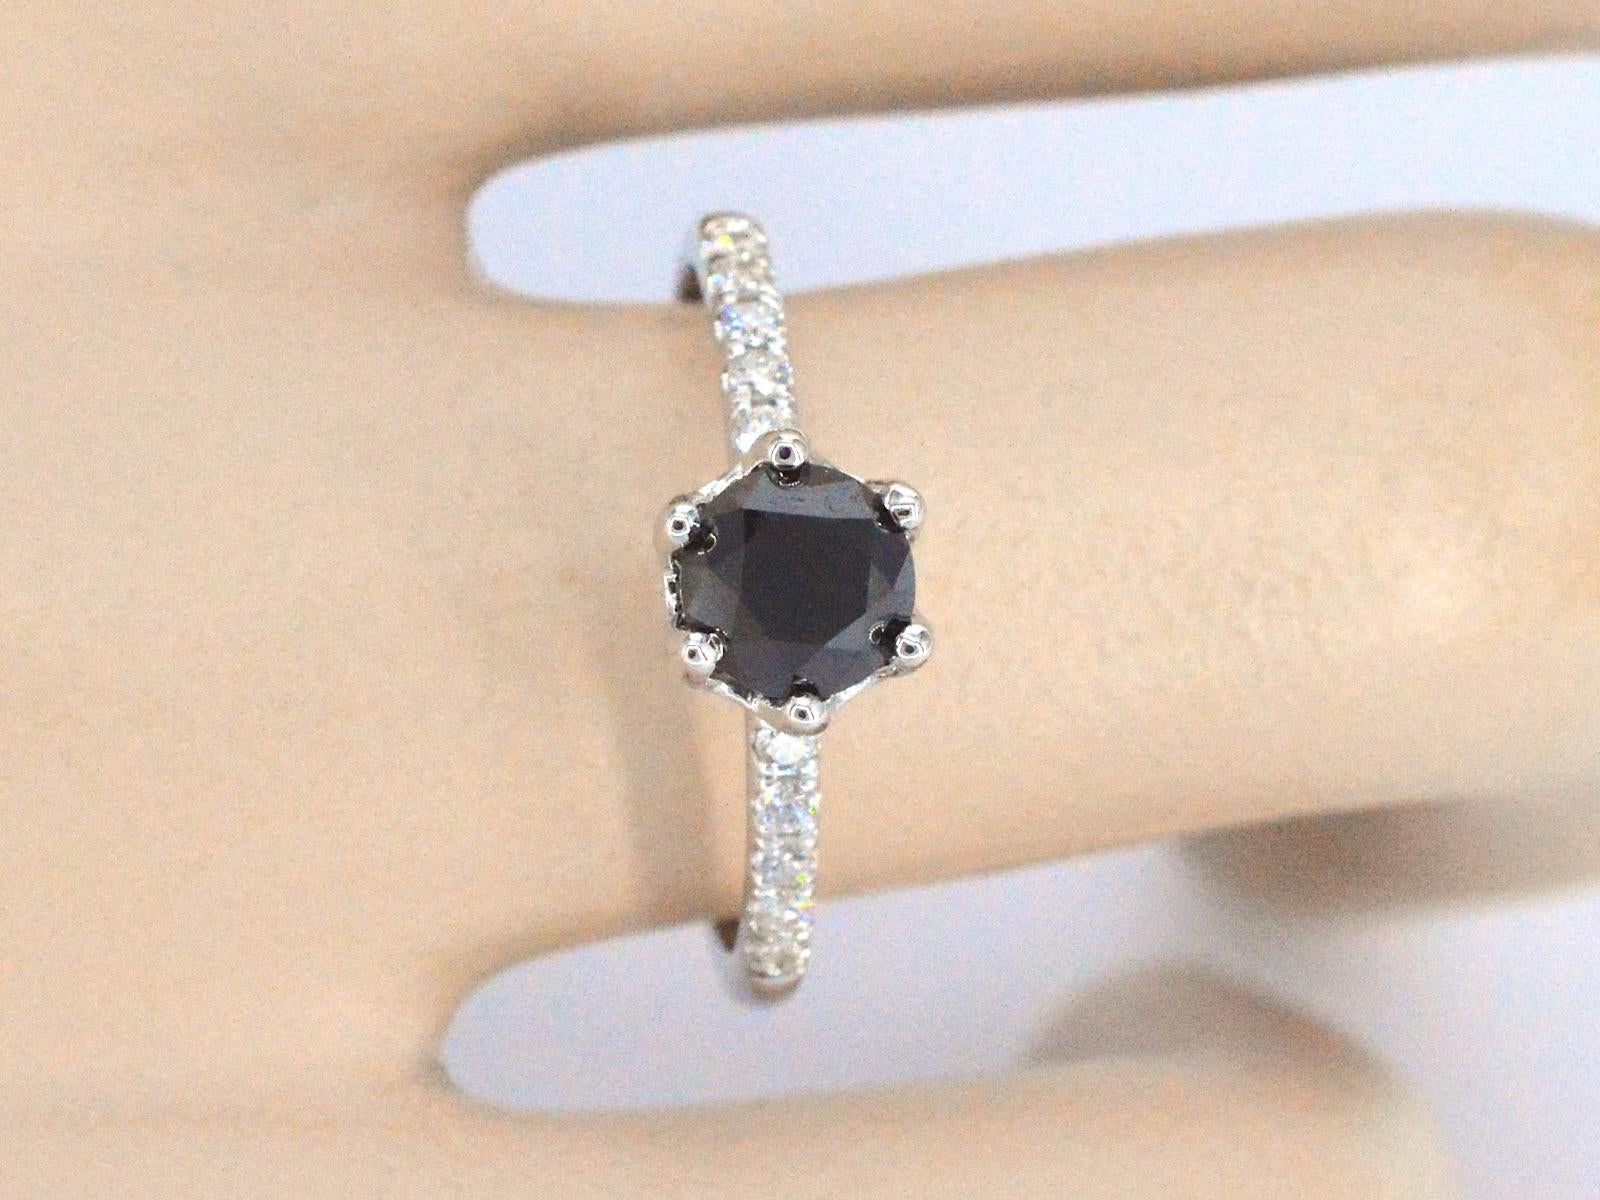 This white gold ring is a stunning and unique piece of jewelry featuring one brilliant cut black diamond and several white diamonds. The white gold is a premium quality metal that is highly lustrous and durable. The black diamond is carefully